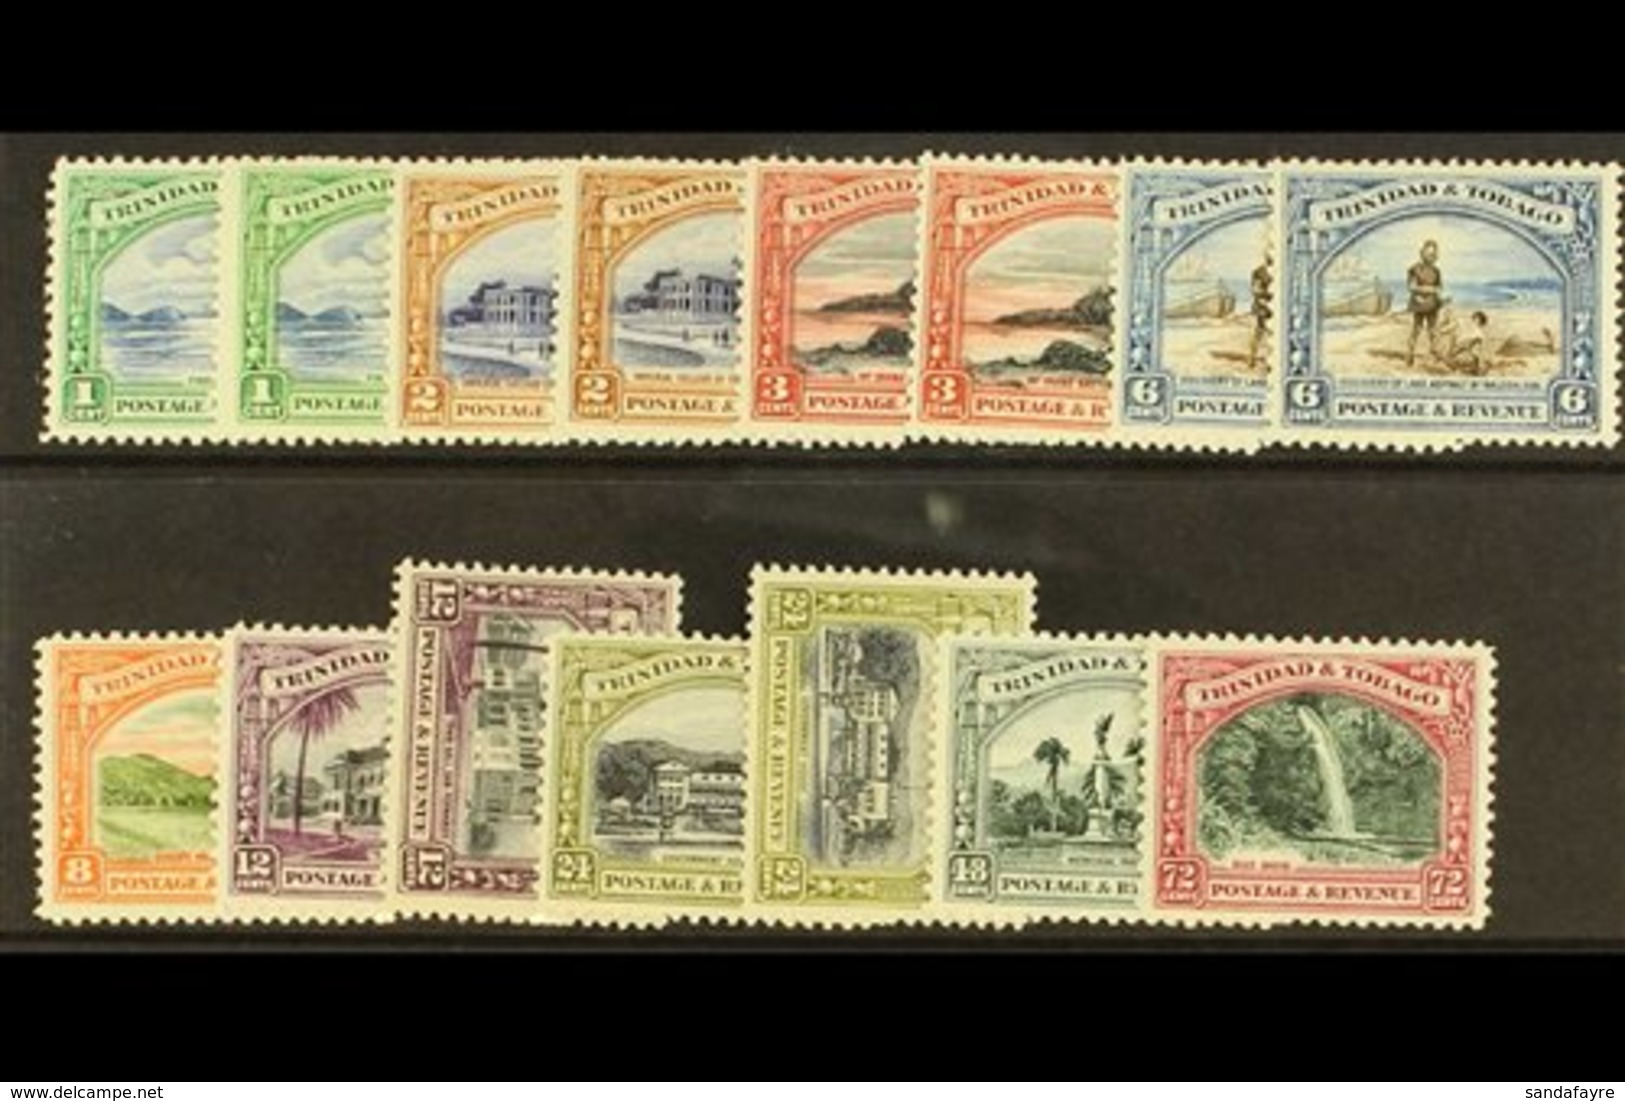 1935-37 Pictorial Set, SG 230/238, Plus Perf. 12½ Set, All But The Latter 12c And 24c Are Never Hinged Mint. (15 Stamps) - Trinité & Tobago (...-1961)